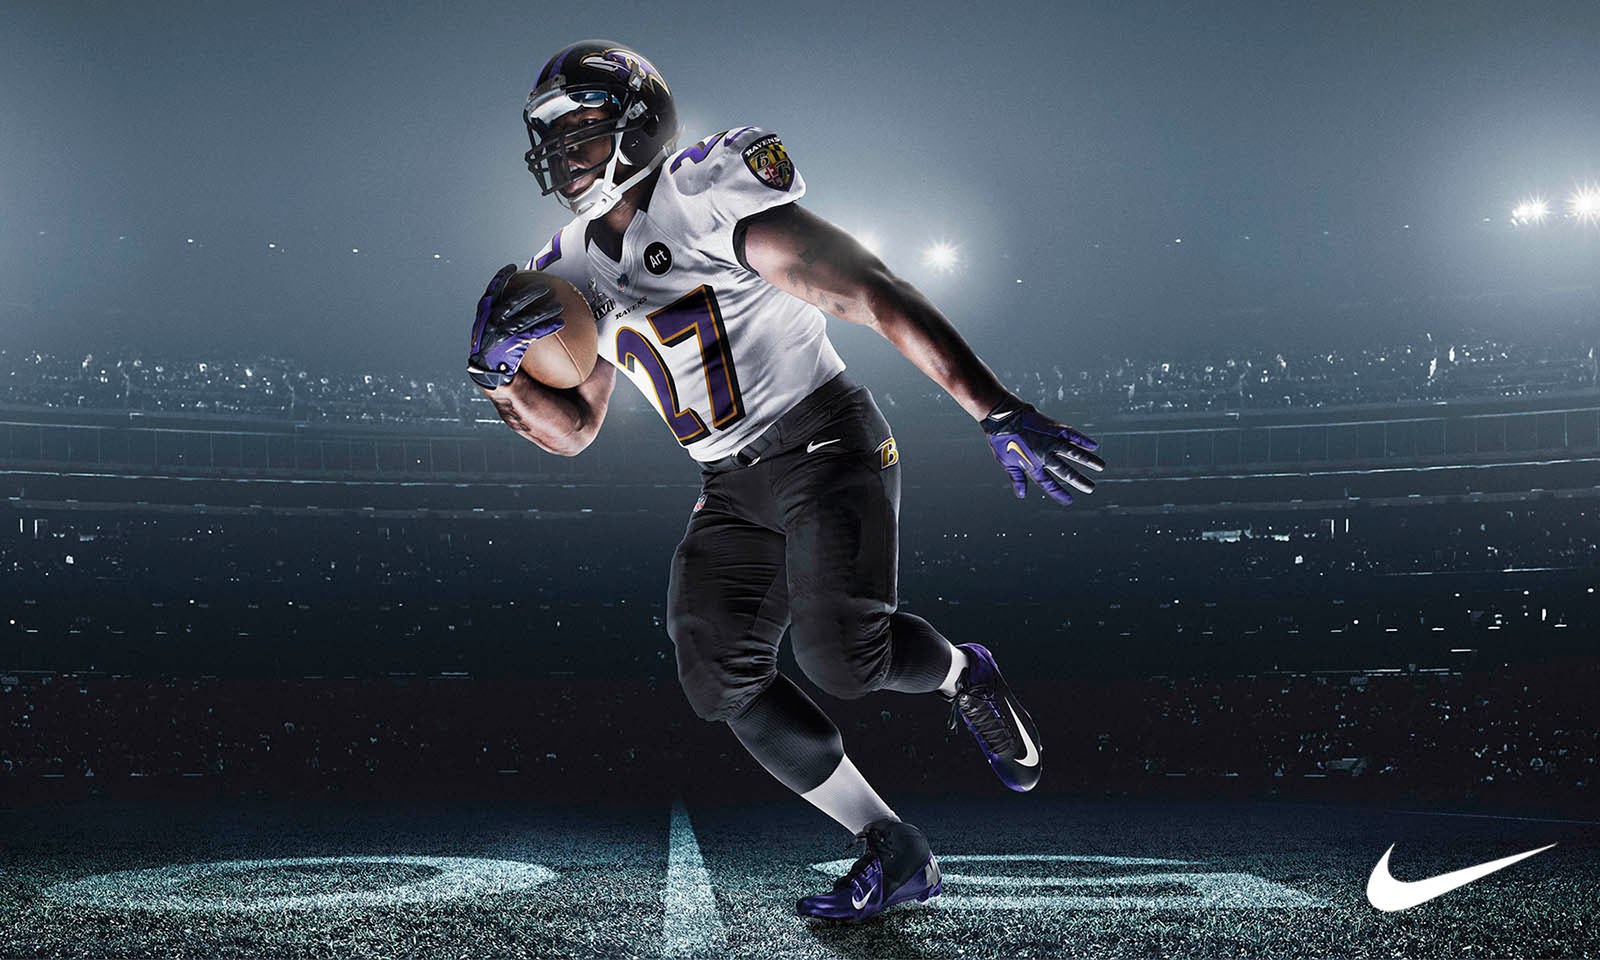 Nfl Football Players Wallpapers Nfl player ray rice hd